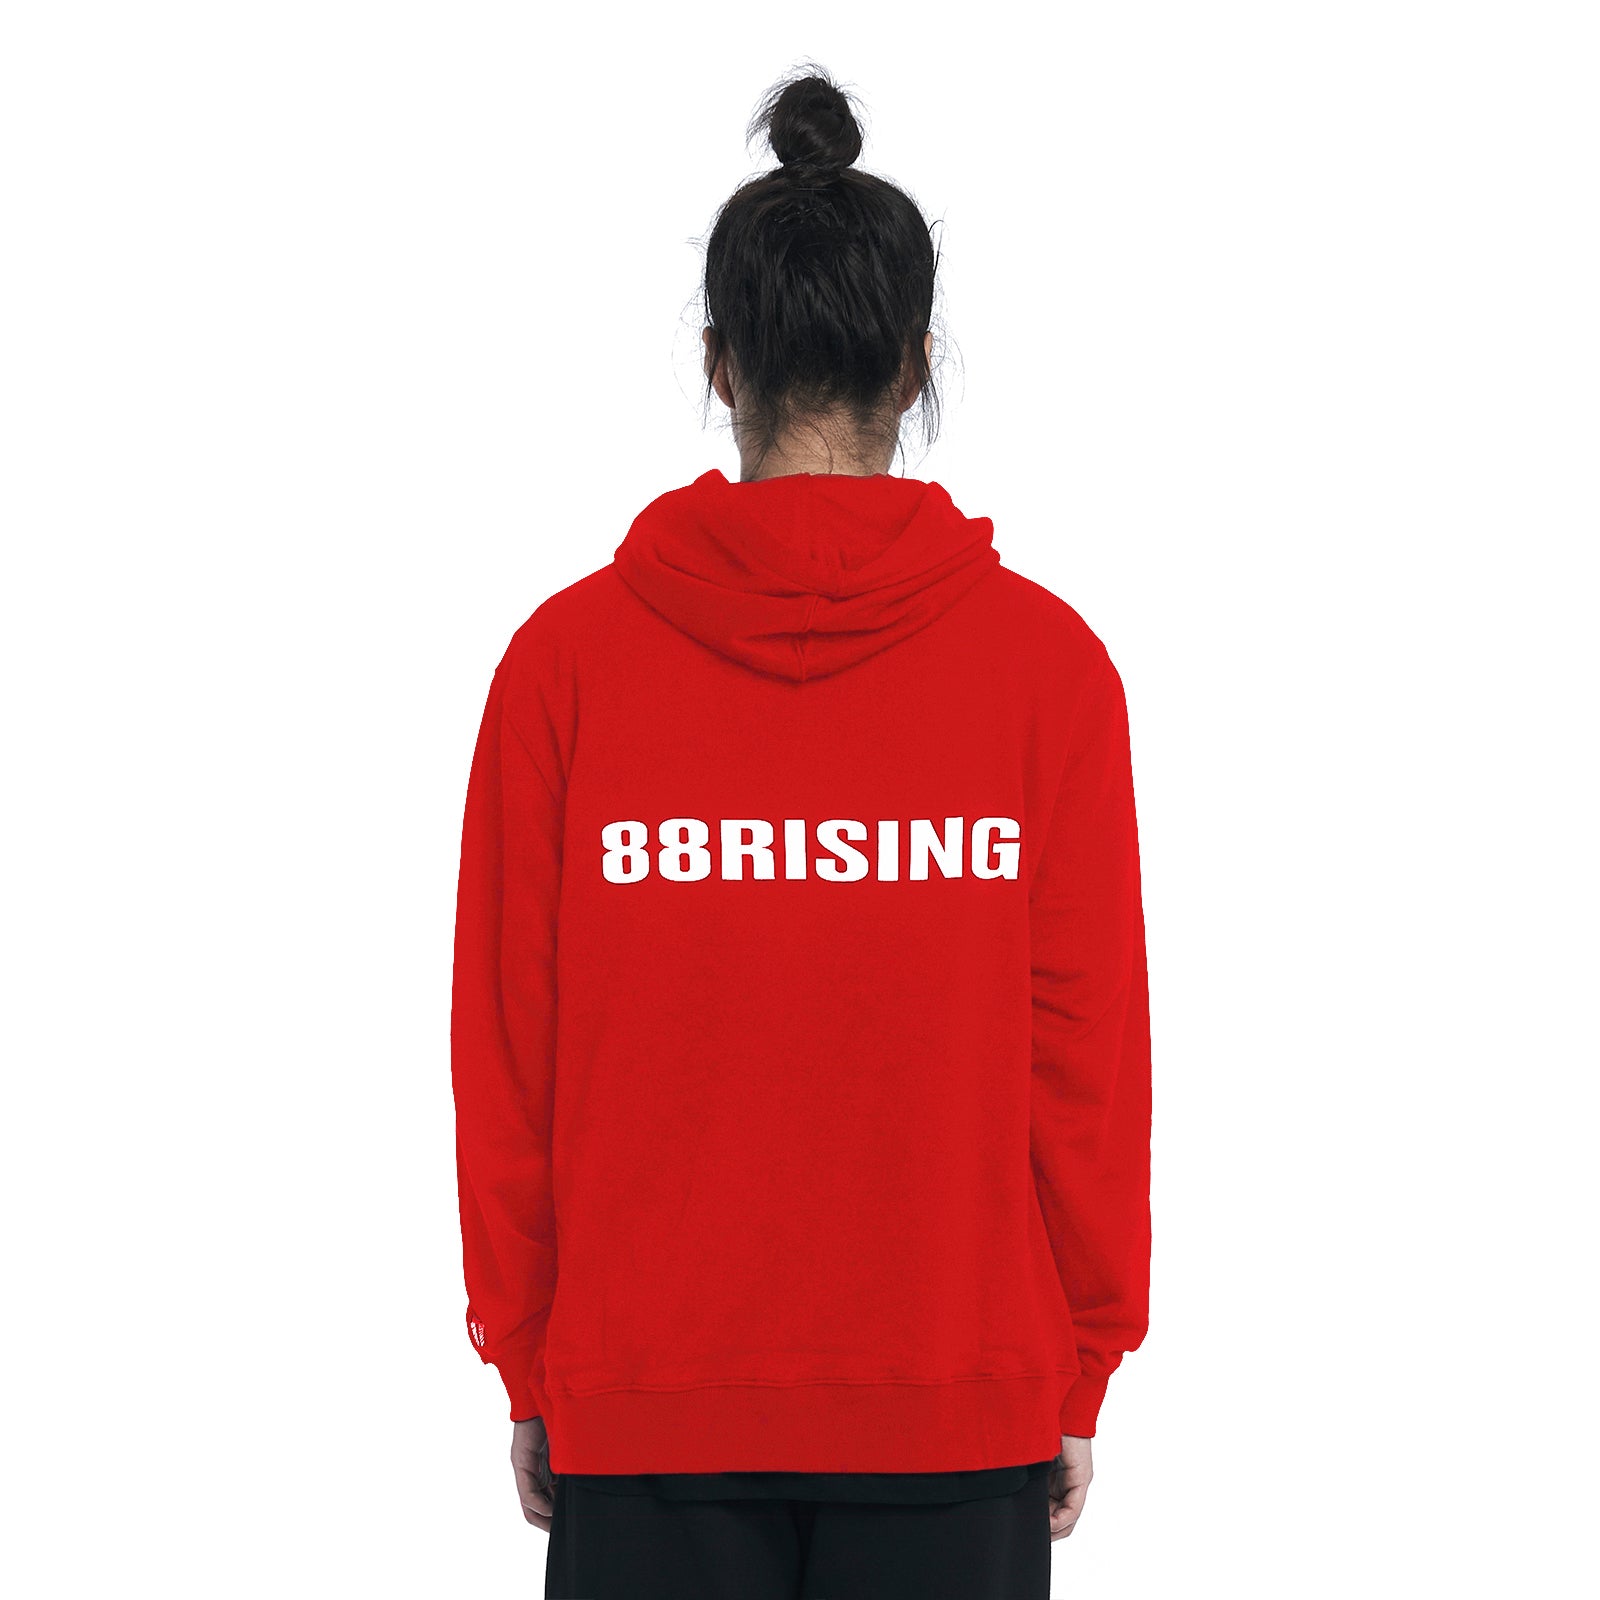 88CORE RED HOODIE Shop – 88rising The